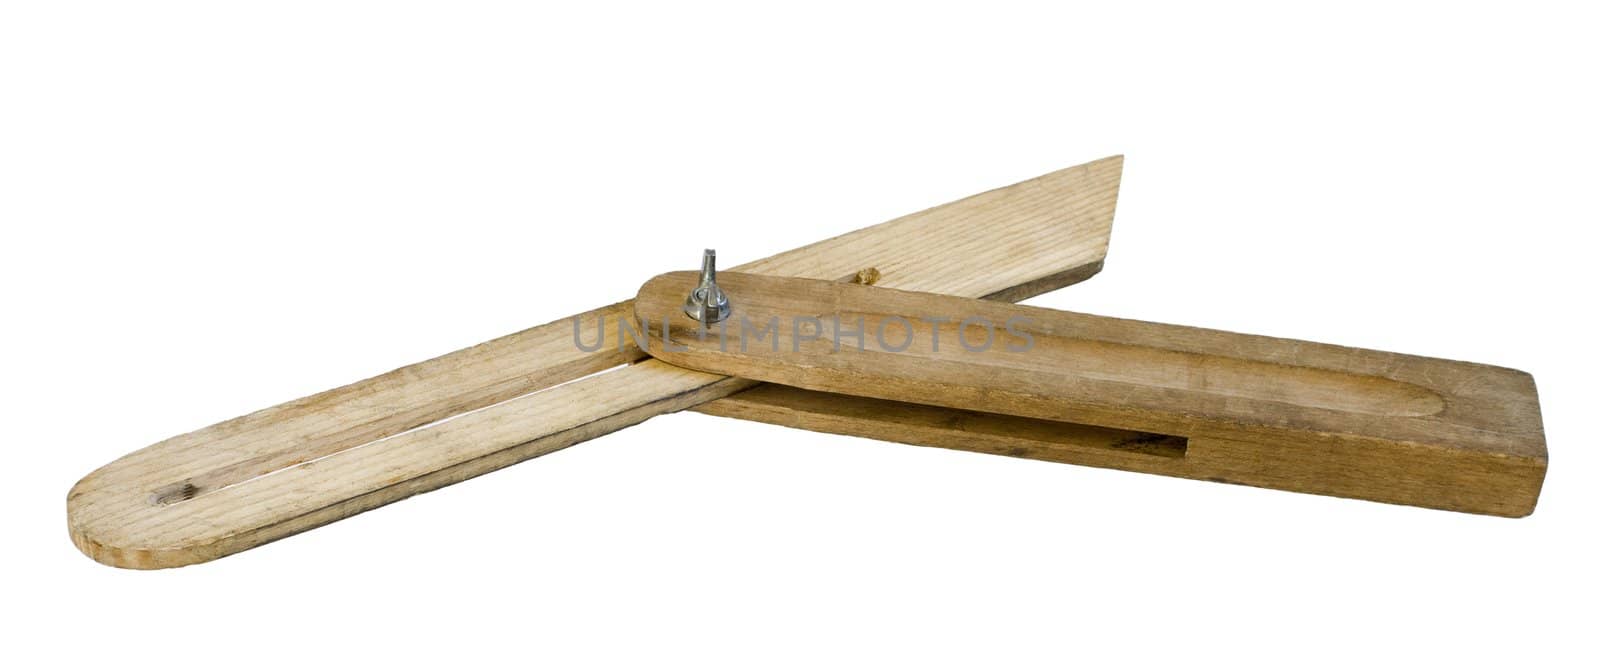 wooden tool for measuring angles by gewoldi